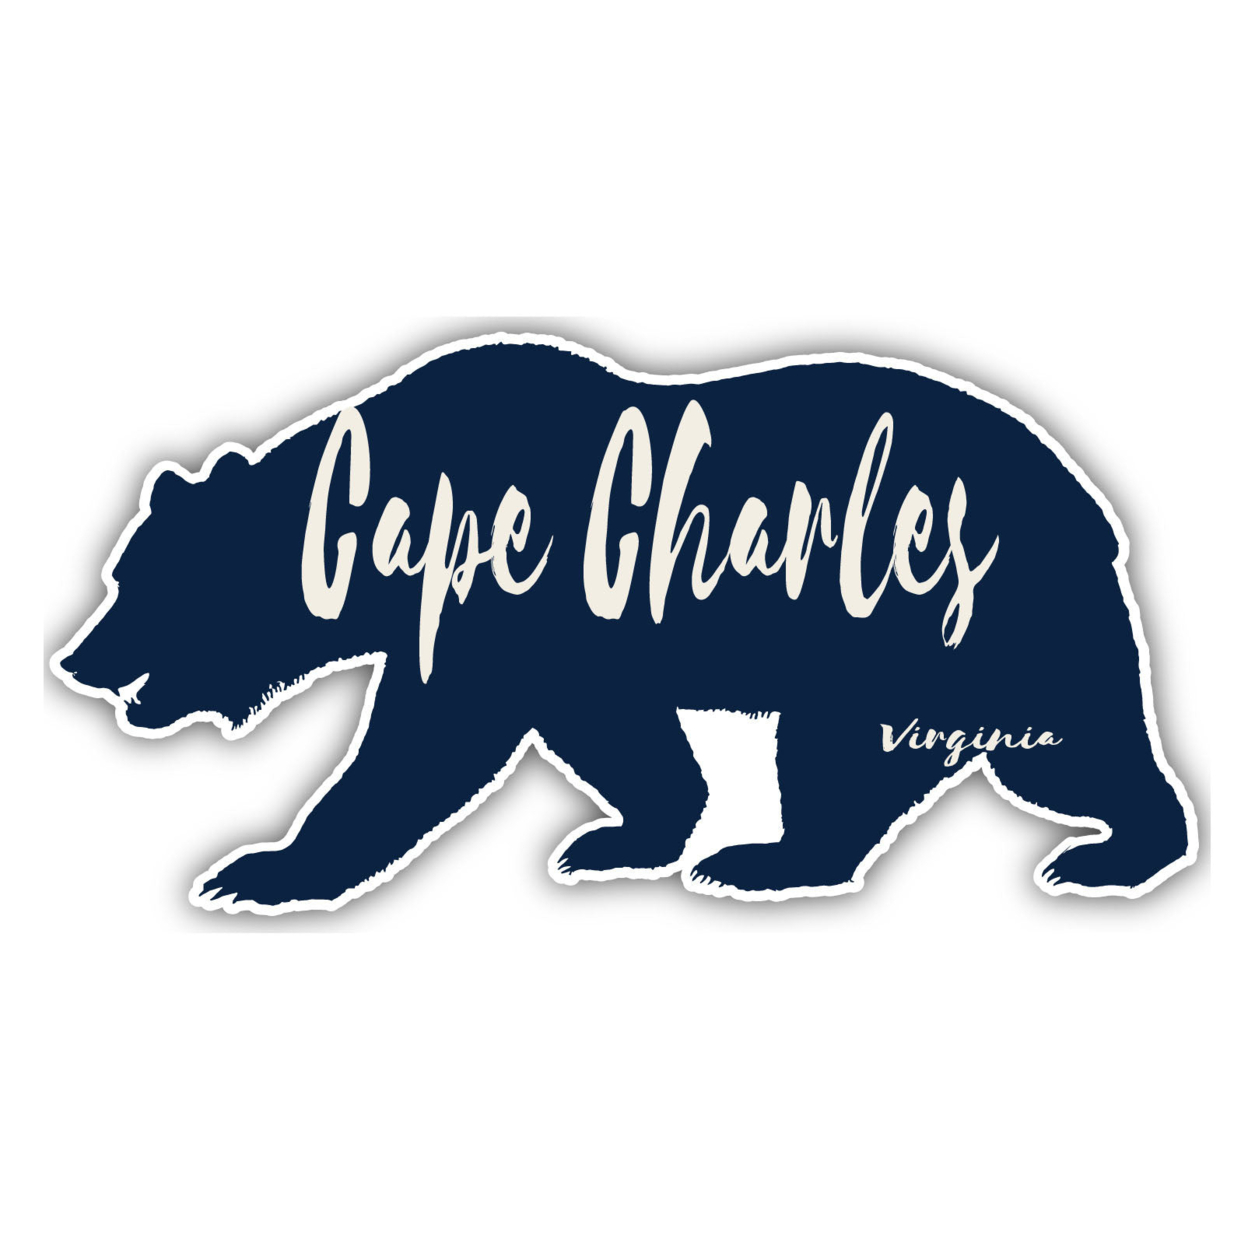 Cape Charles Virginia Souvenir Decorative Stickers (Choose Theme And Size) - 4-Pack, 4-Inch, Tent